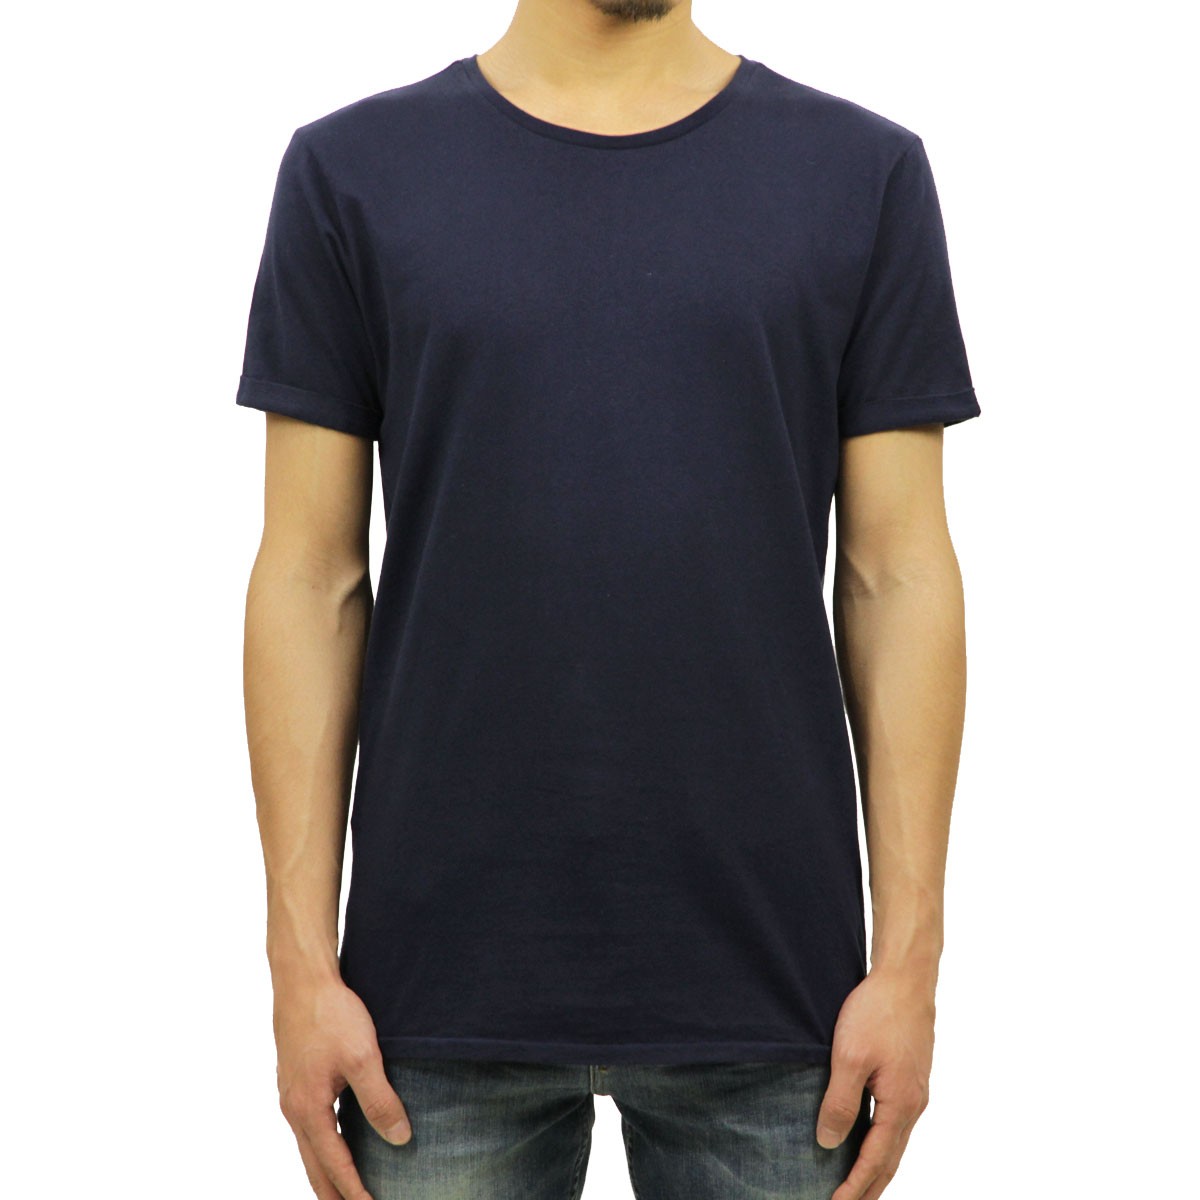 åɥ SCOTCHSODA Ź  ȾµT Round neck tee with special roll up sleeves 130865 57